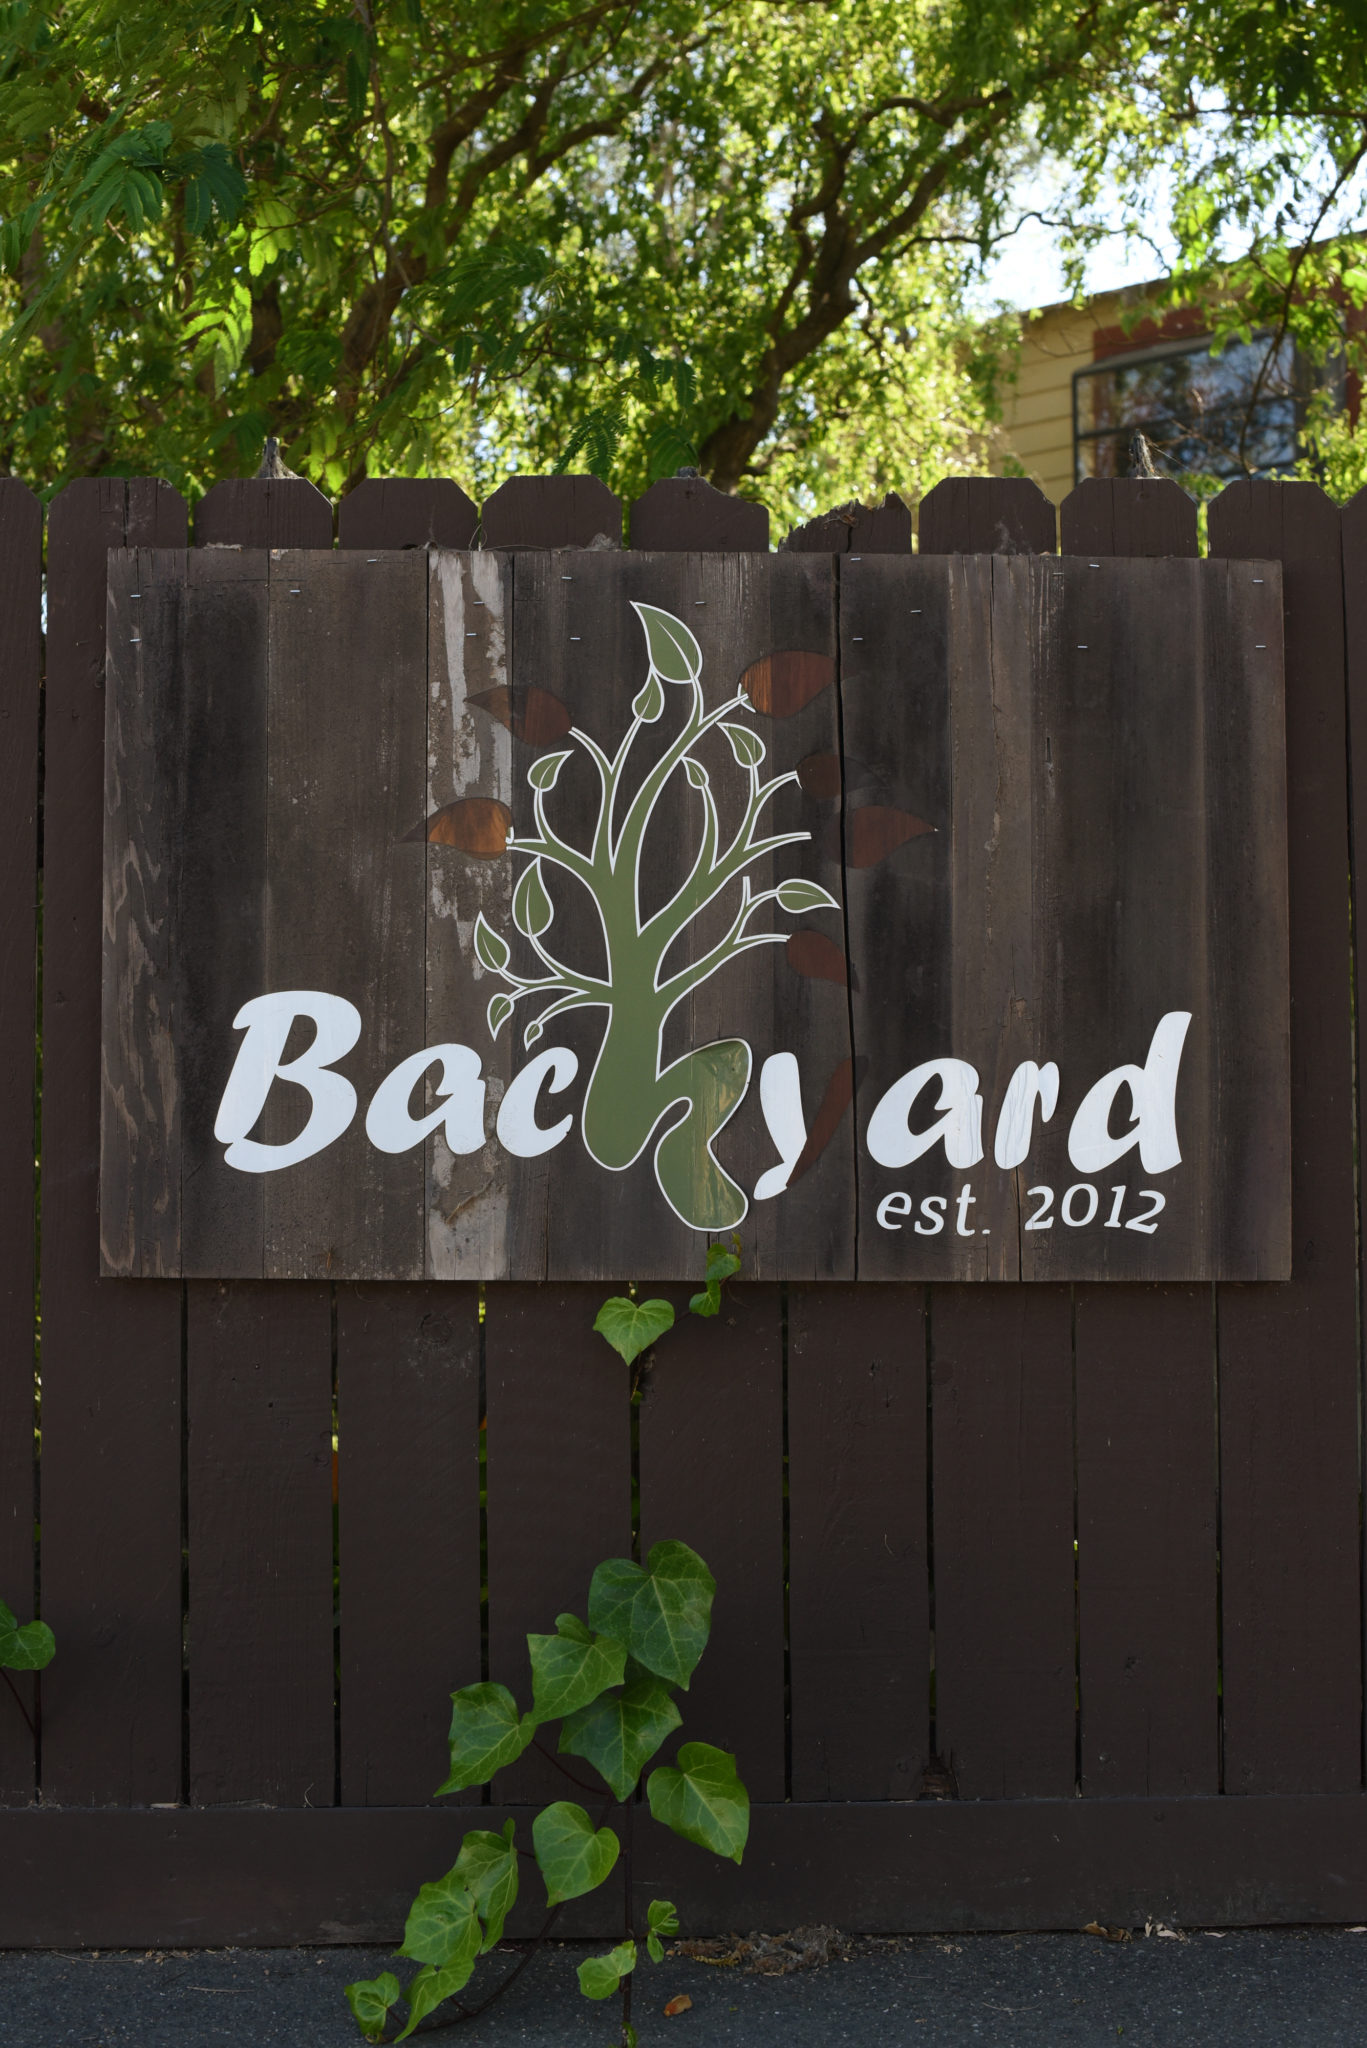 The familiar sign of Daniel Kedan and Marianna Gardenhire’s Backyard restaurant which is permanently closing June 6 after making it through the pandemic in Forestville, Calif. on Tuesday, May 18, 2021. (Photo: Erik Castro/for The Press Democrat)